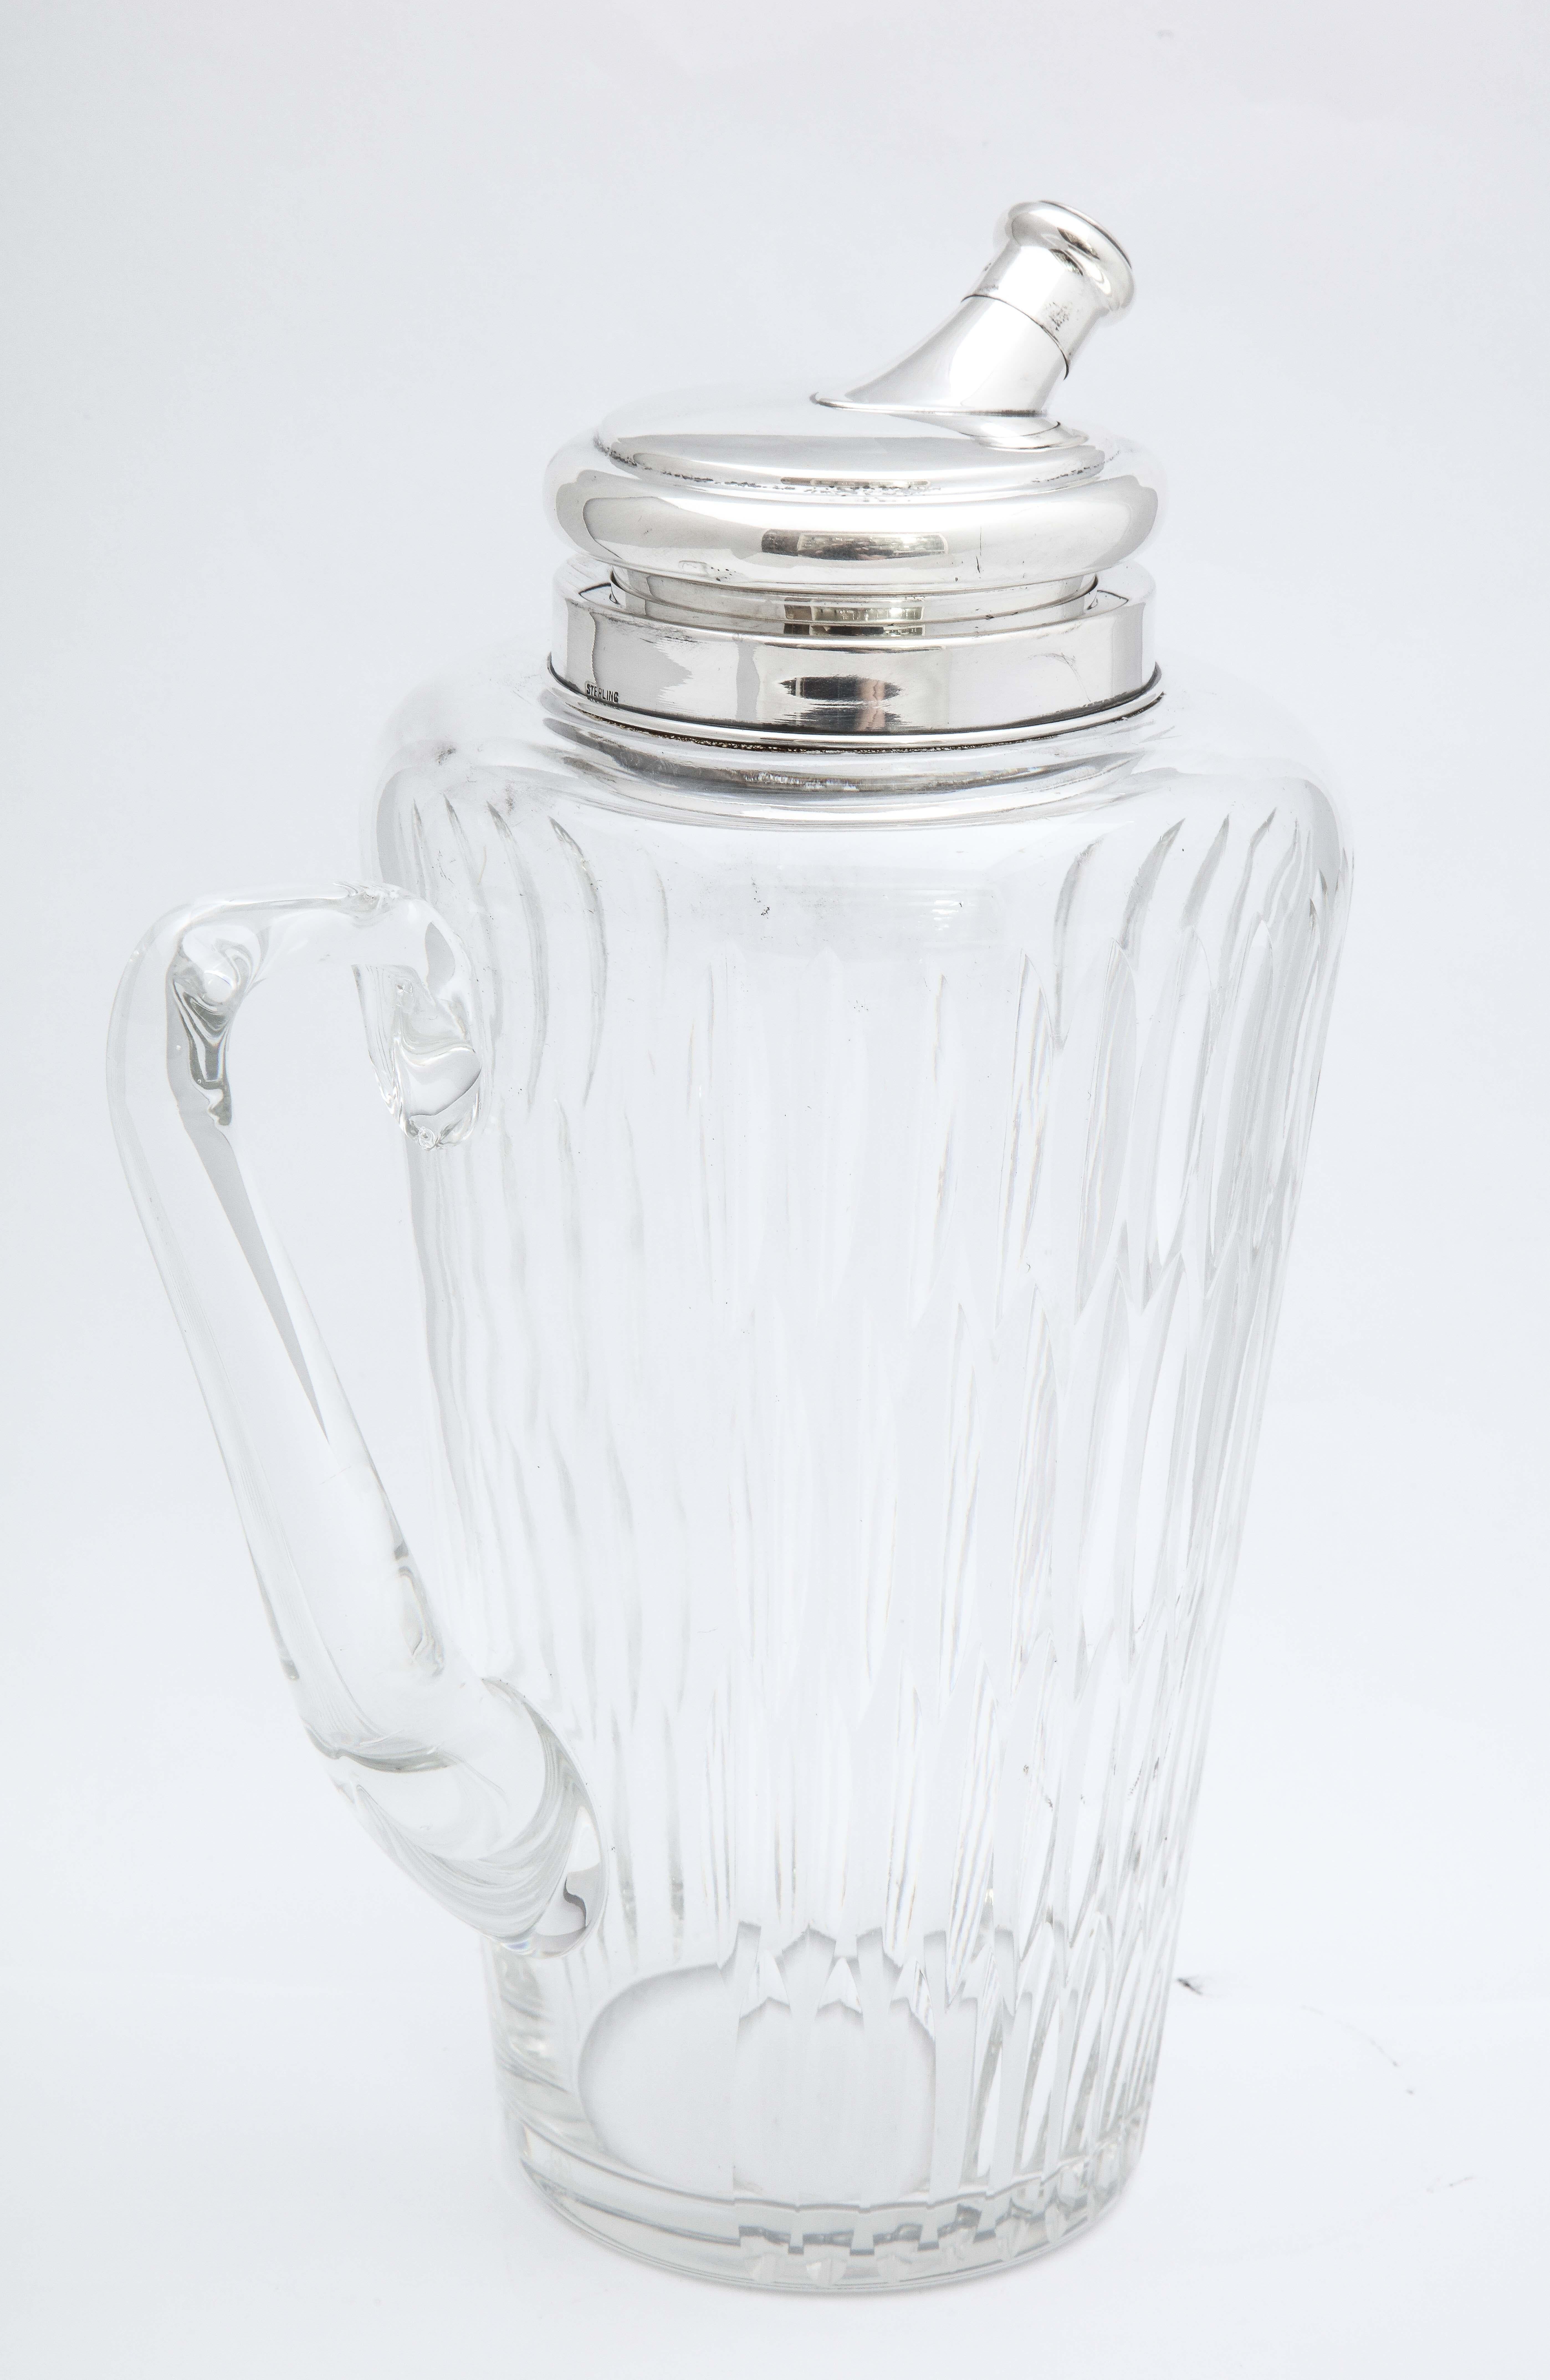 Mid-century, sterling silver-mounted glass cocktail shaker, New York, Ca. 1950's T.C. Hawkes and Co. - makers. Glass is signed on the base with the Hawkes logo. Measures 11 1/4 inches high x 5 inches diameter at widest point x 7 inches wide from